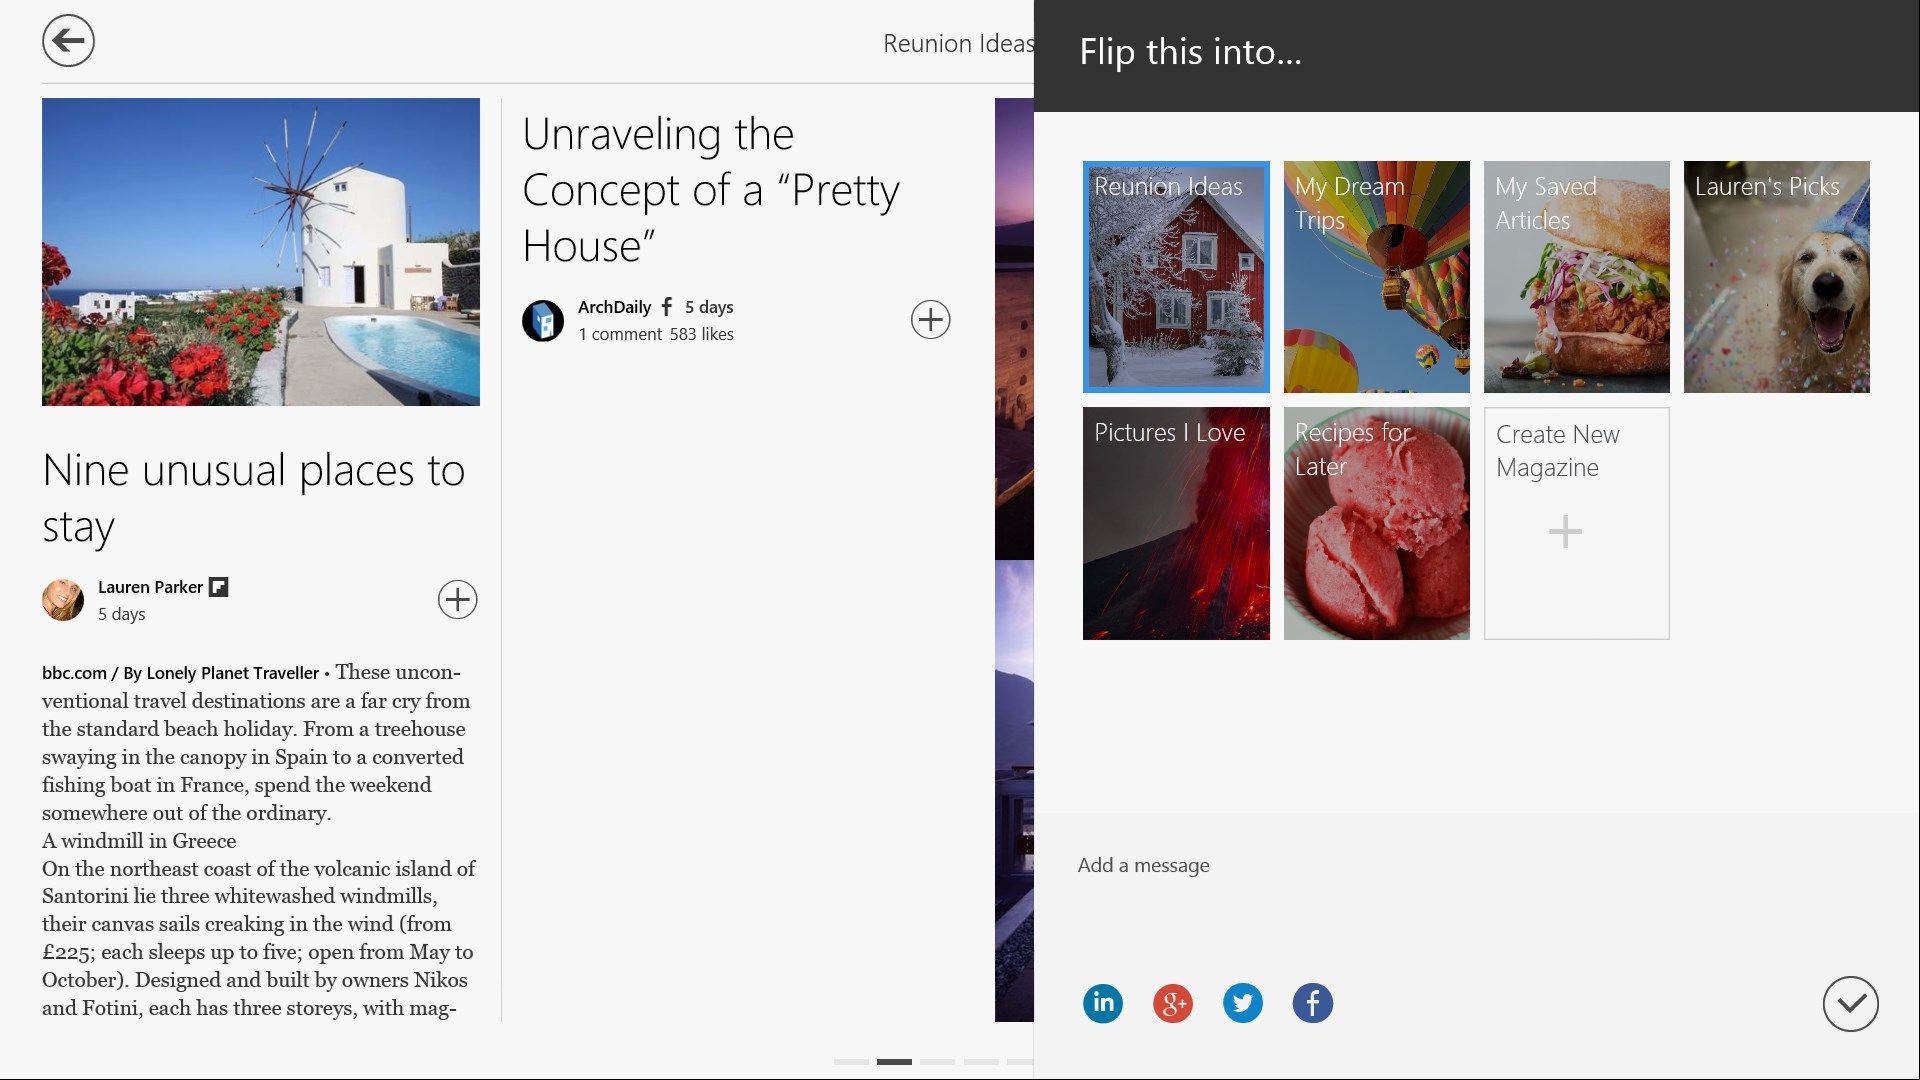 Use the + button to save your favorite stories into your own magazines.